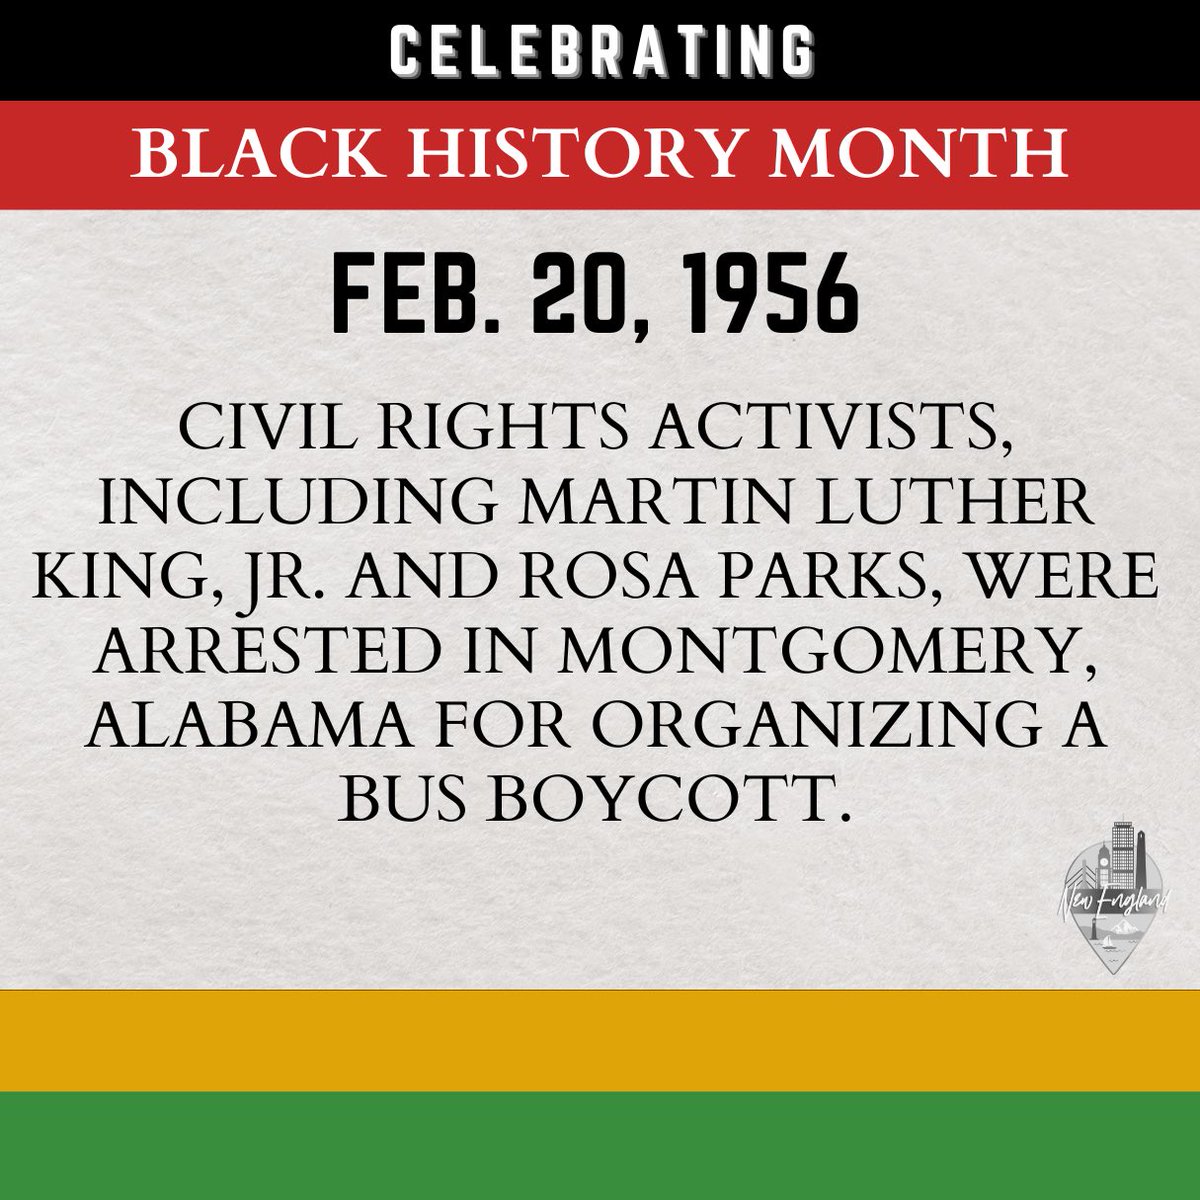 Today in Black History, we recognize an important event that ignited change.